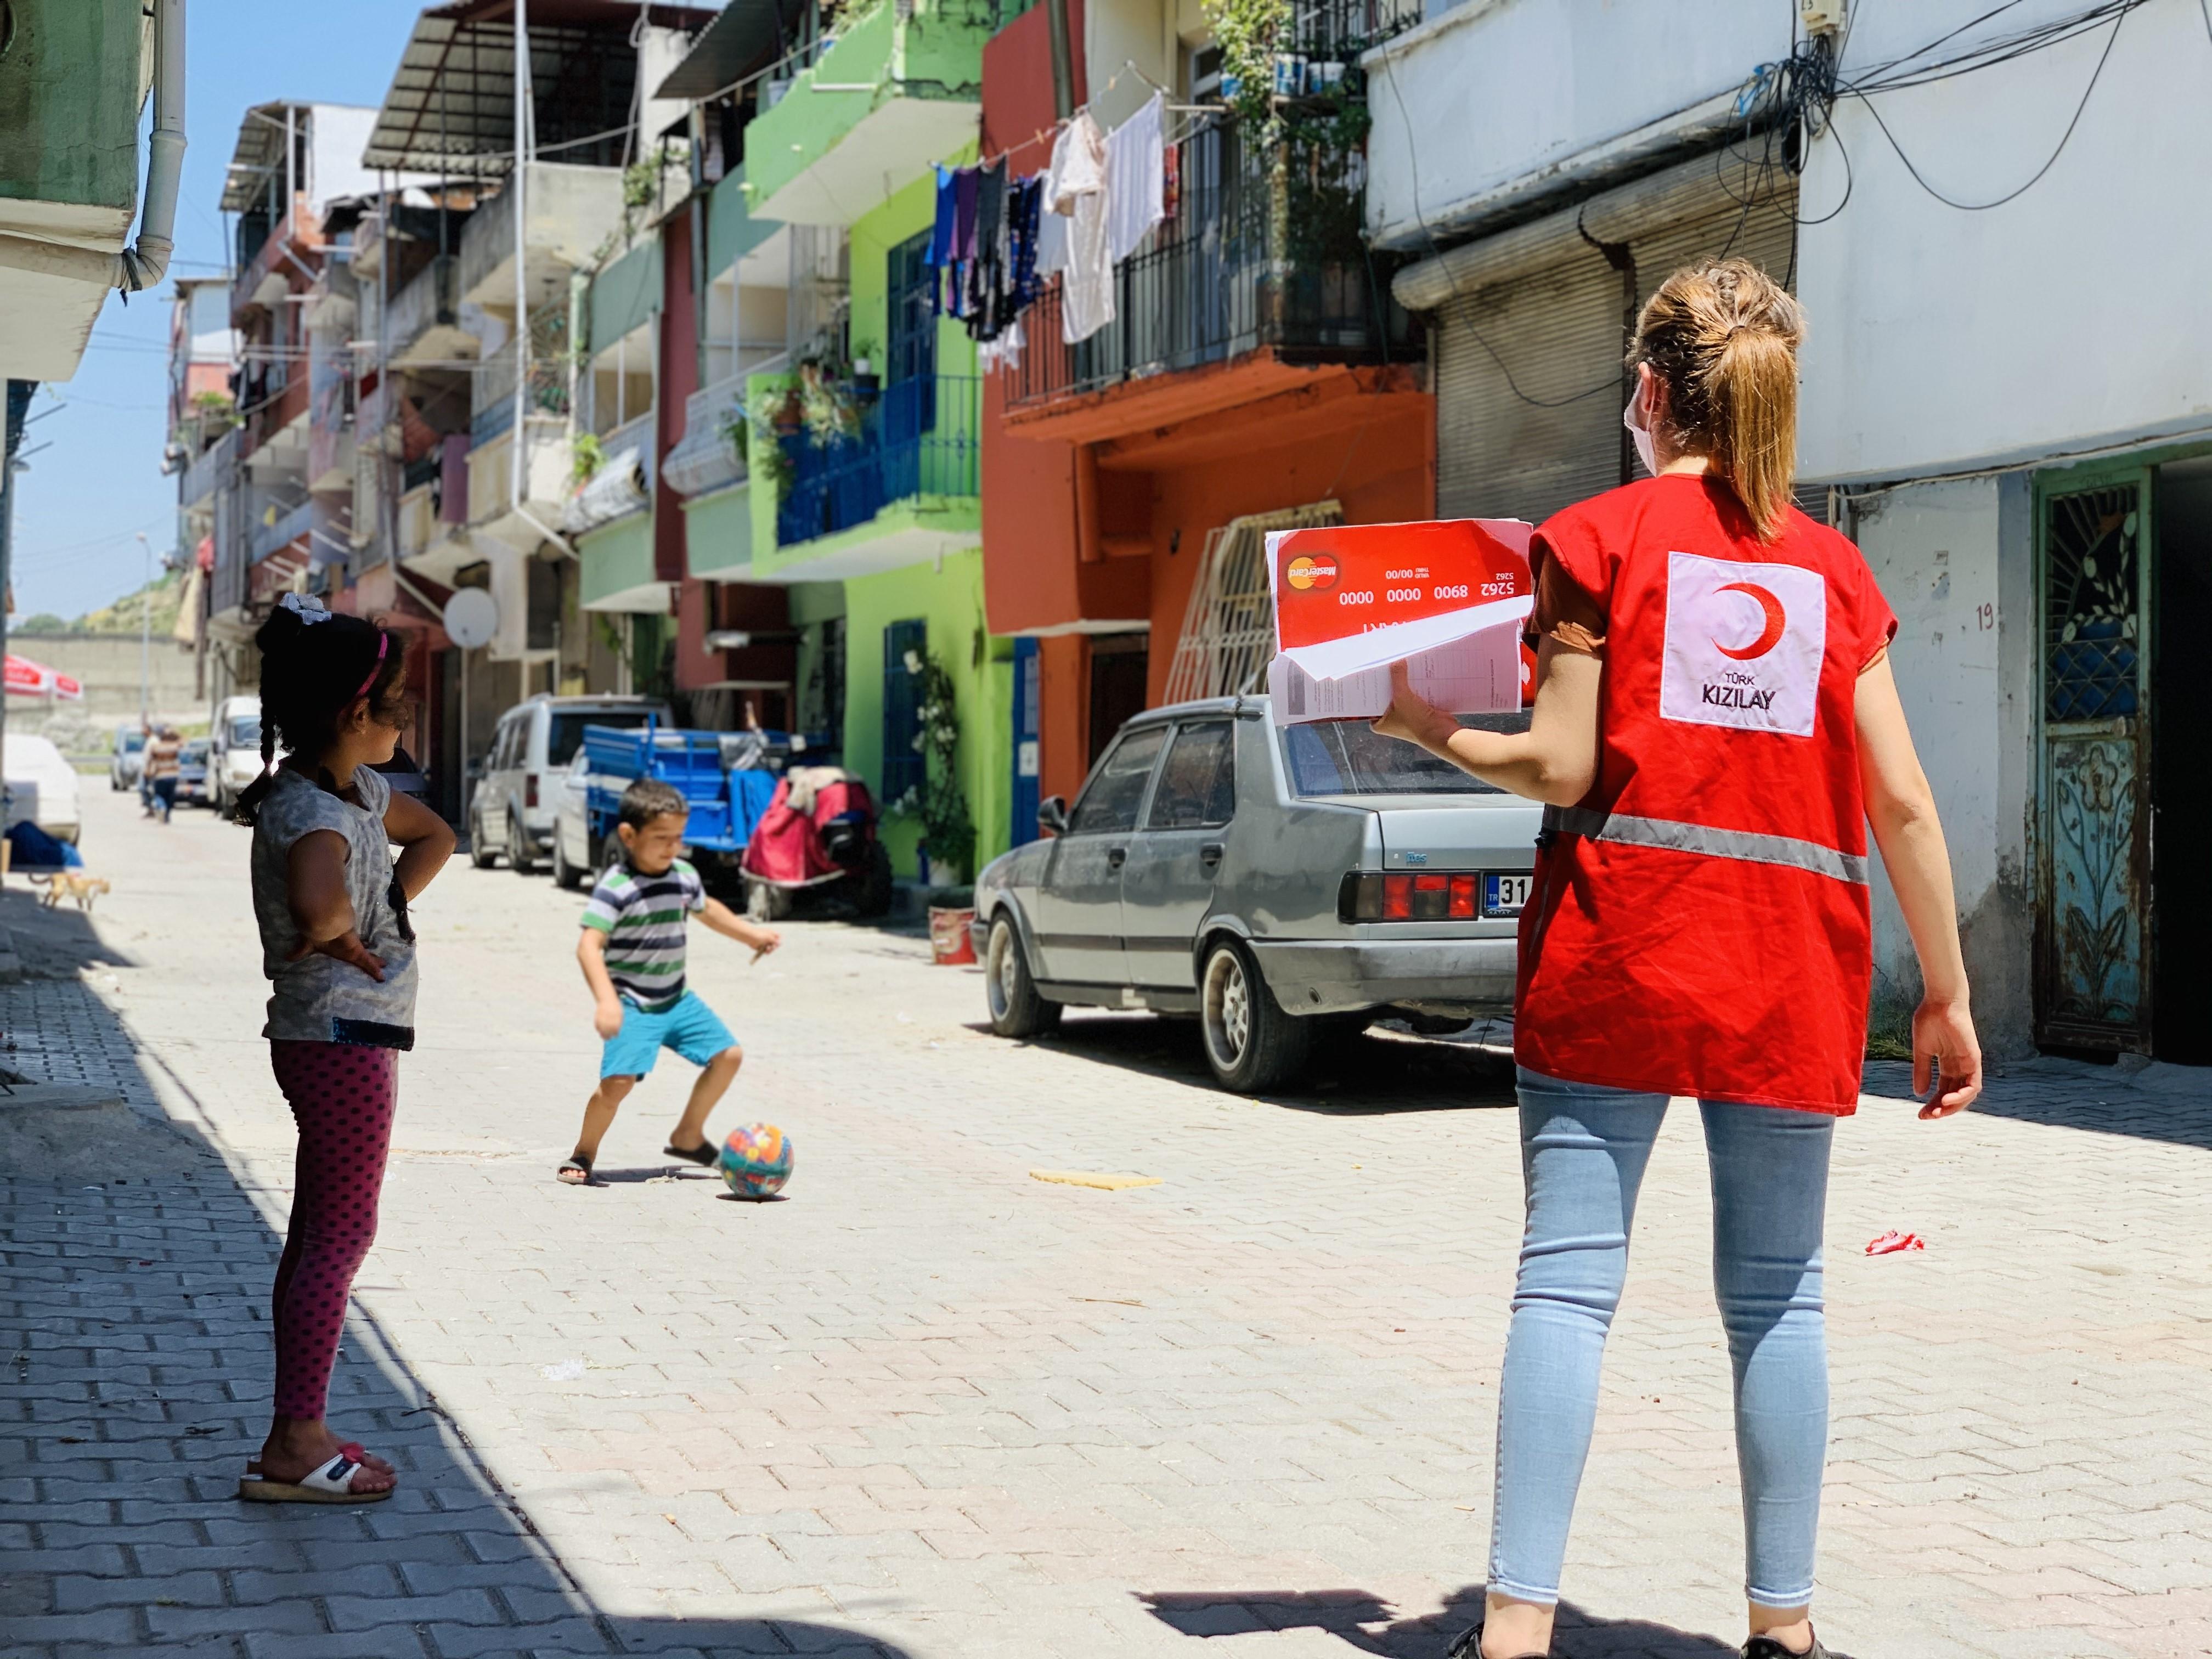 Two children play ball in the street with a red crescent worker